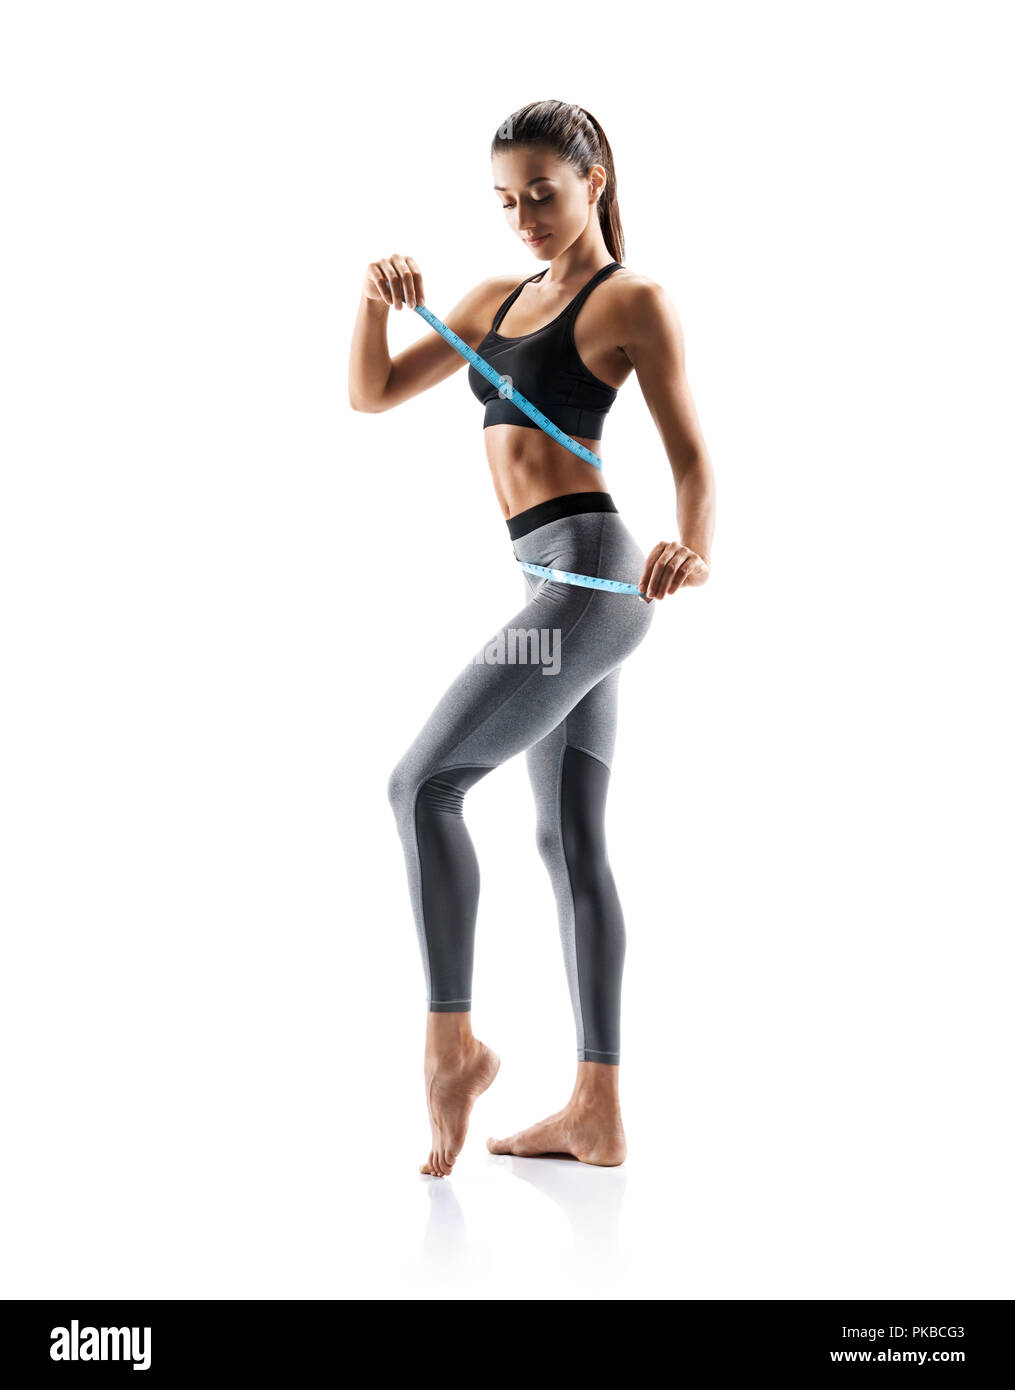 Young slim girl in sportswear isolated on white background. Concept of healthy life and natural balance between body and mental development. Full leng Stock Photo